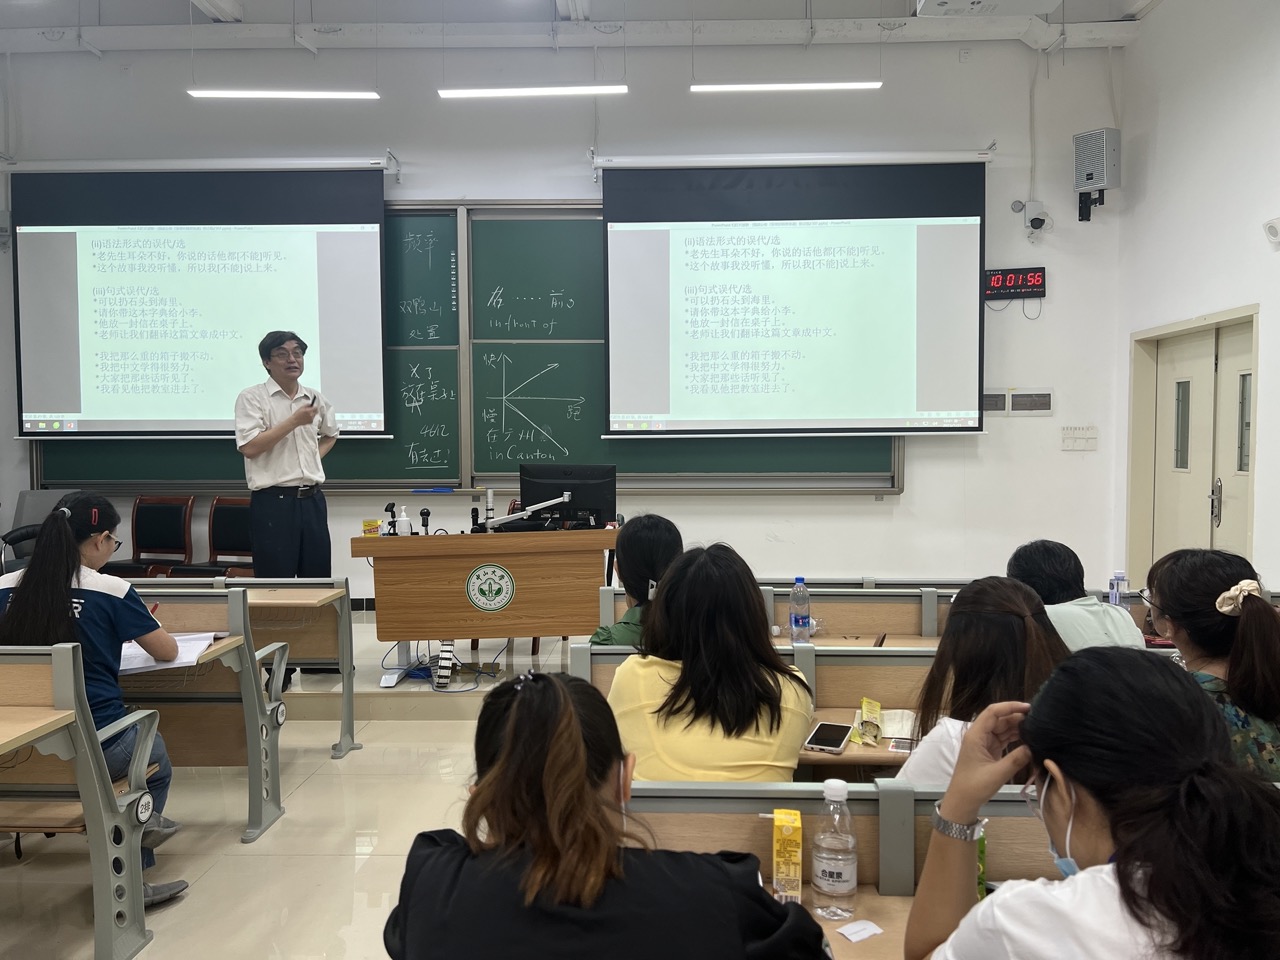 Prof Shi lecture